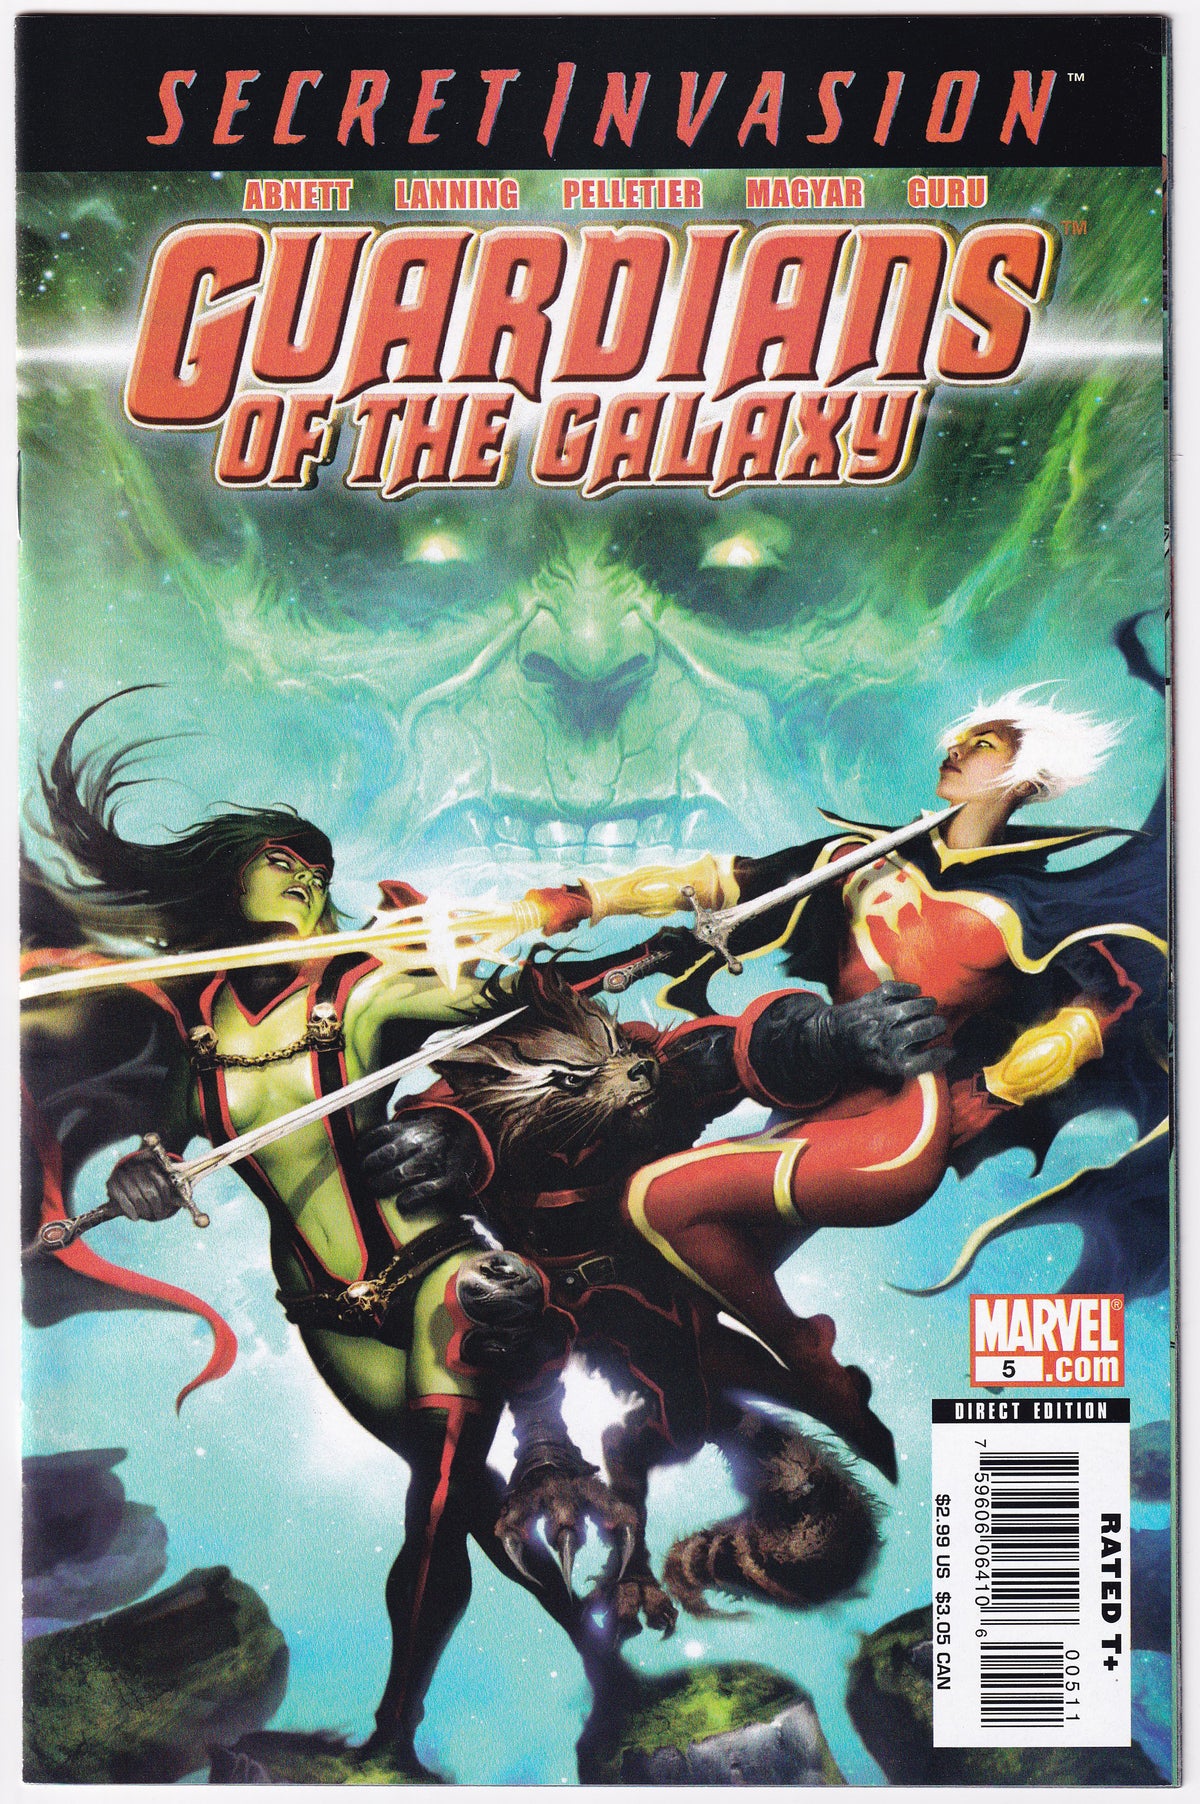 Photo of Guardians Of The Galaxy, Vol. 2 (2008)  Iss 5A Near Mint  Comic sold by Stronghold Collectibles